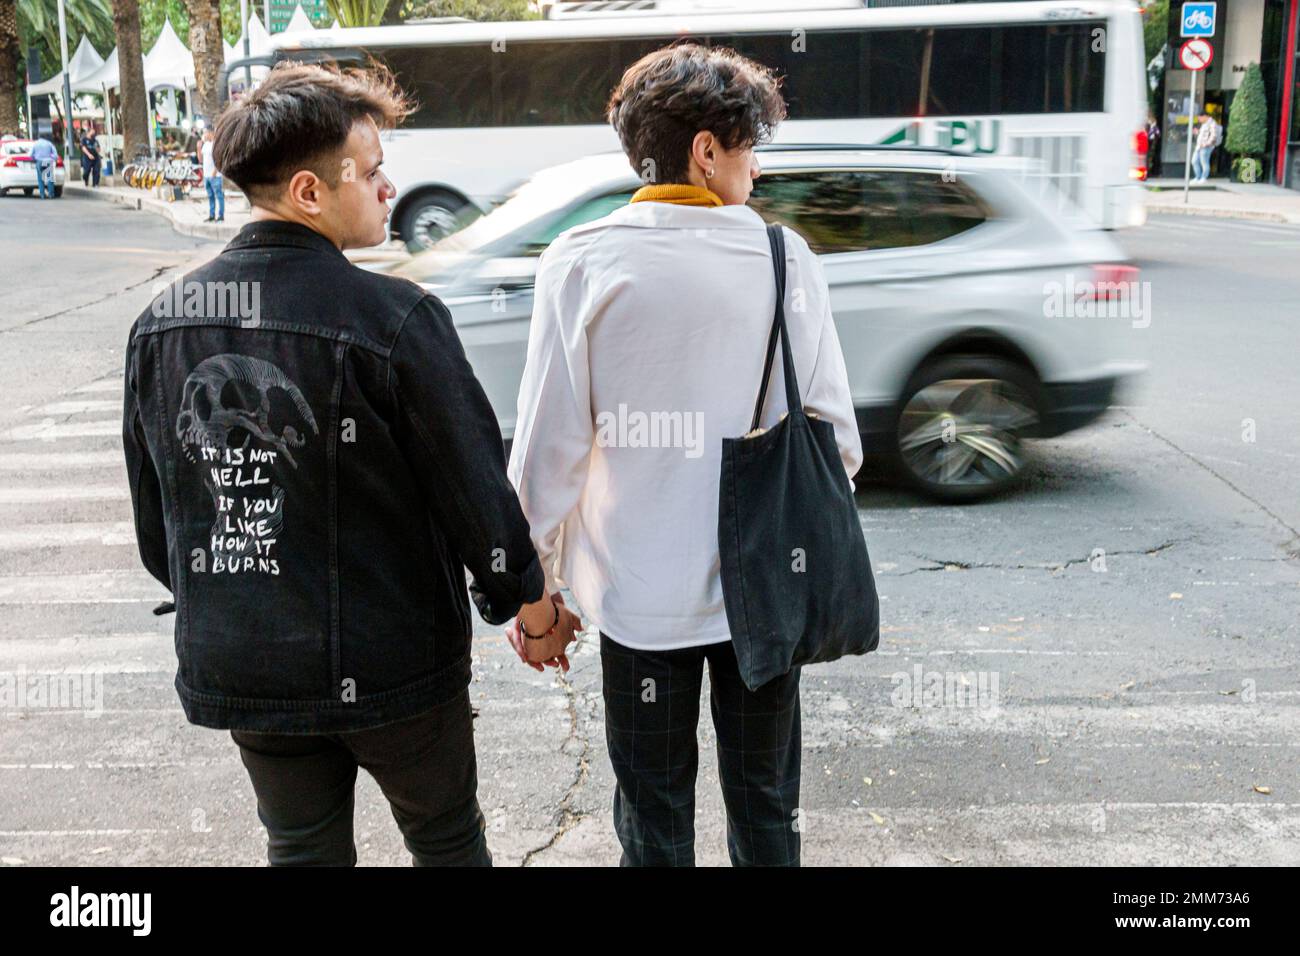 Mexico City,Avenida Paseo de la Reforma,holding hands gay couple,crossing busy street,man men male,adult adults,resident residents,pedestrian pedestri Stock Photo